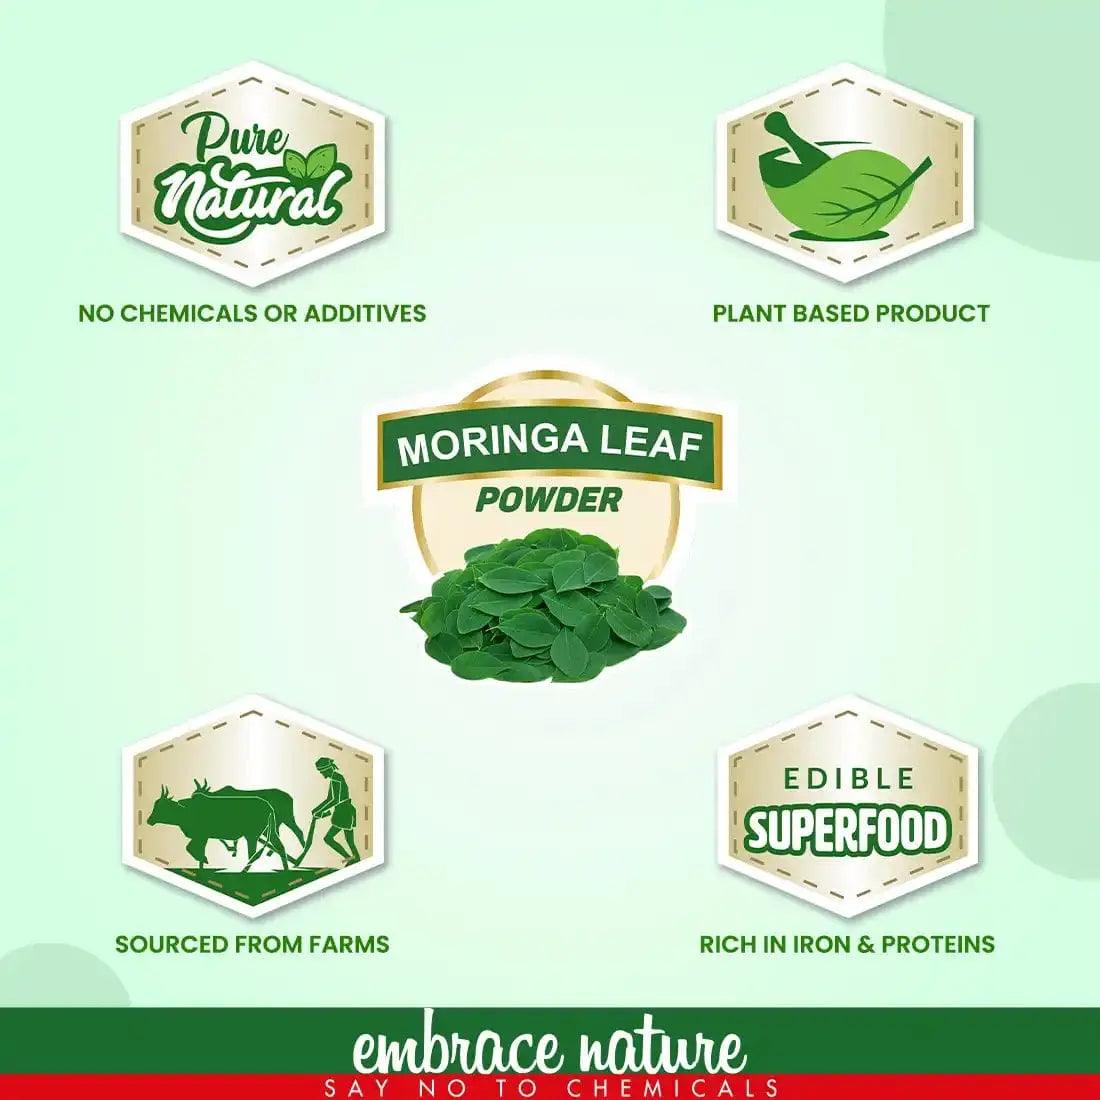 Nature Sure Moringa Leaf Powder is a plant-based product sourced directly from farms. It is rich in iron and proteins, and is free from any chemicals or additives